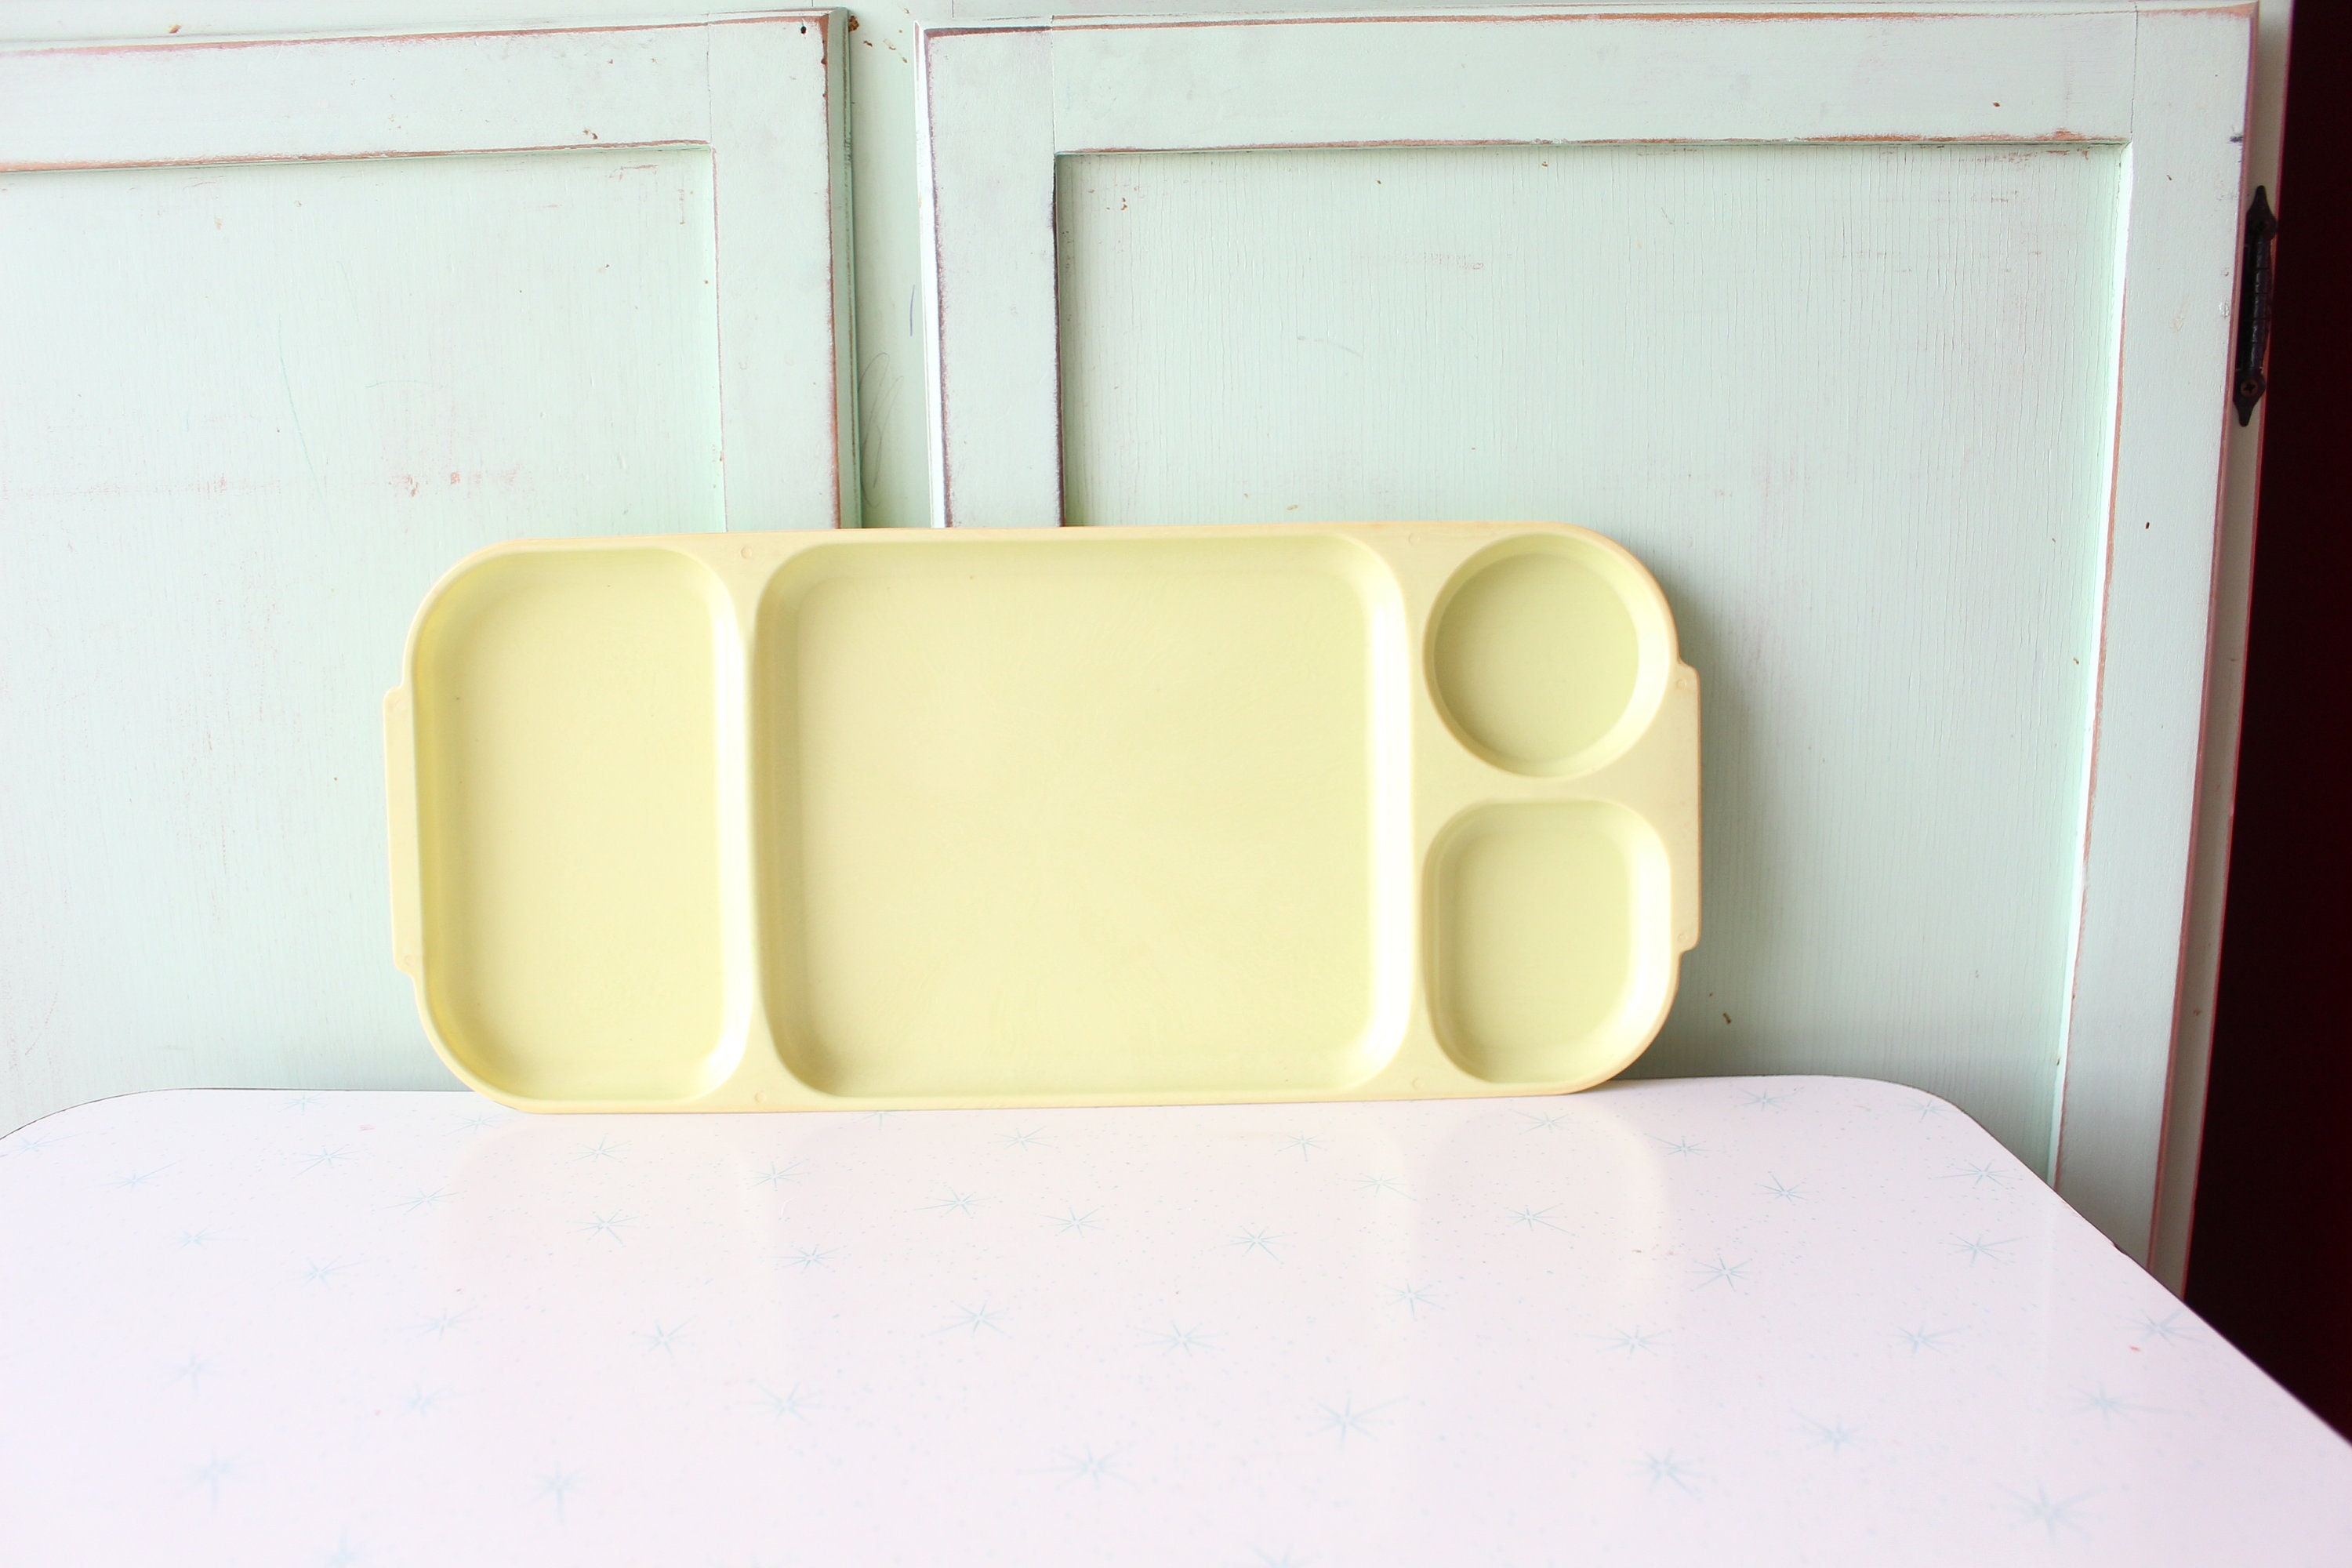 Melamine Cafeteria Trays, Vintage Cambro Trays, Cambro Melamine Melmac  Trays, School Lunch Trays, Beige Colored Melamine Made in USA 